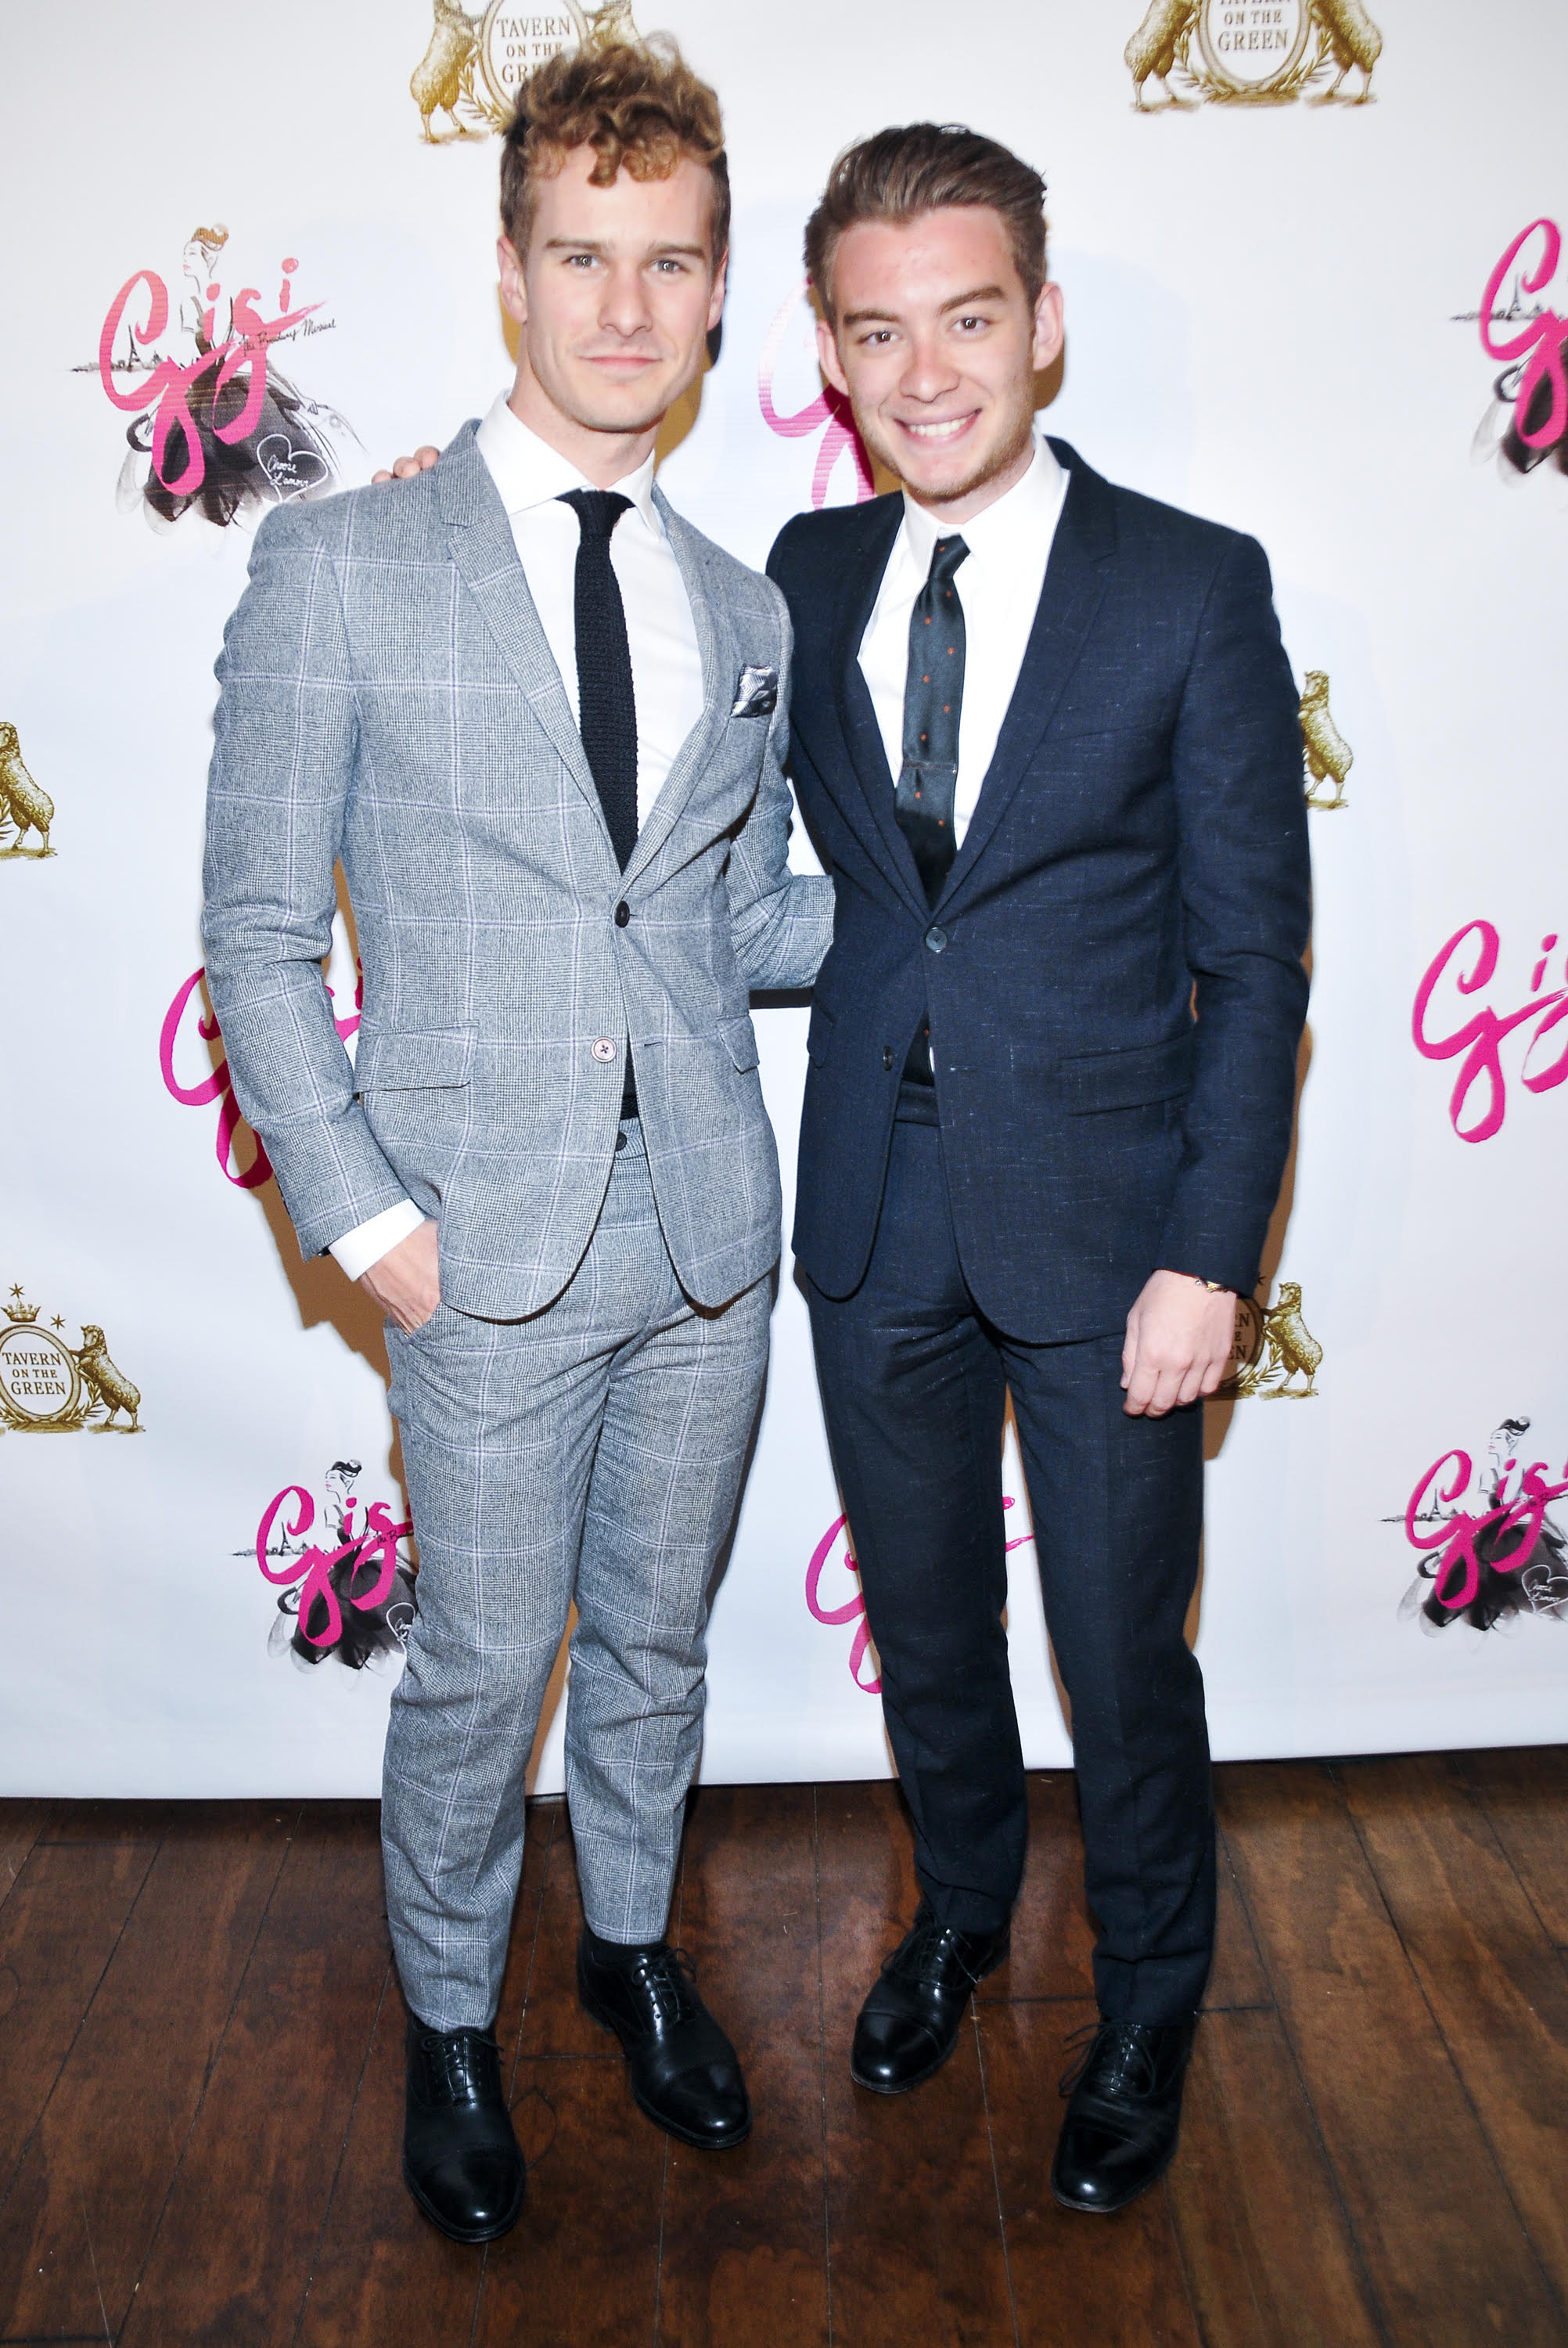 Ryan Steele & Antonio Marion attend the opening night of the Broadway Revival of Gigi.